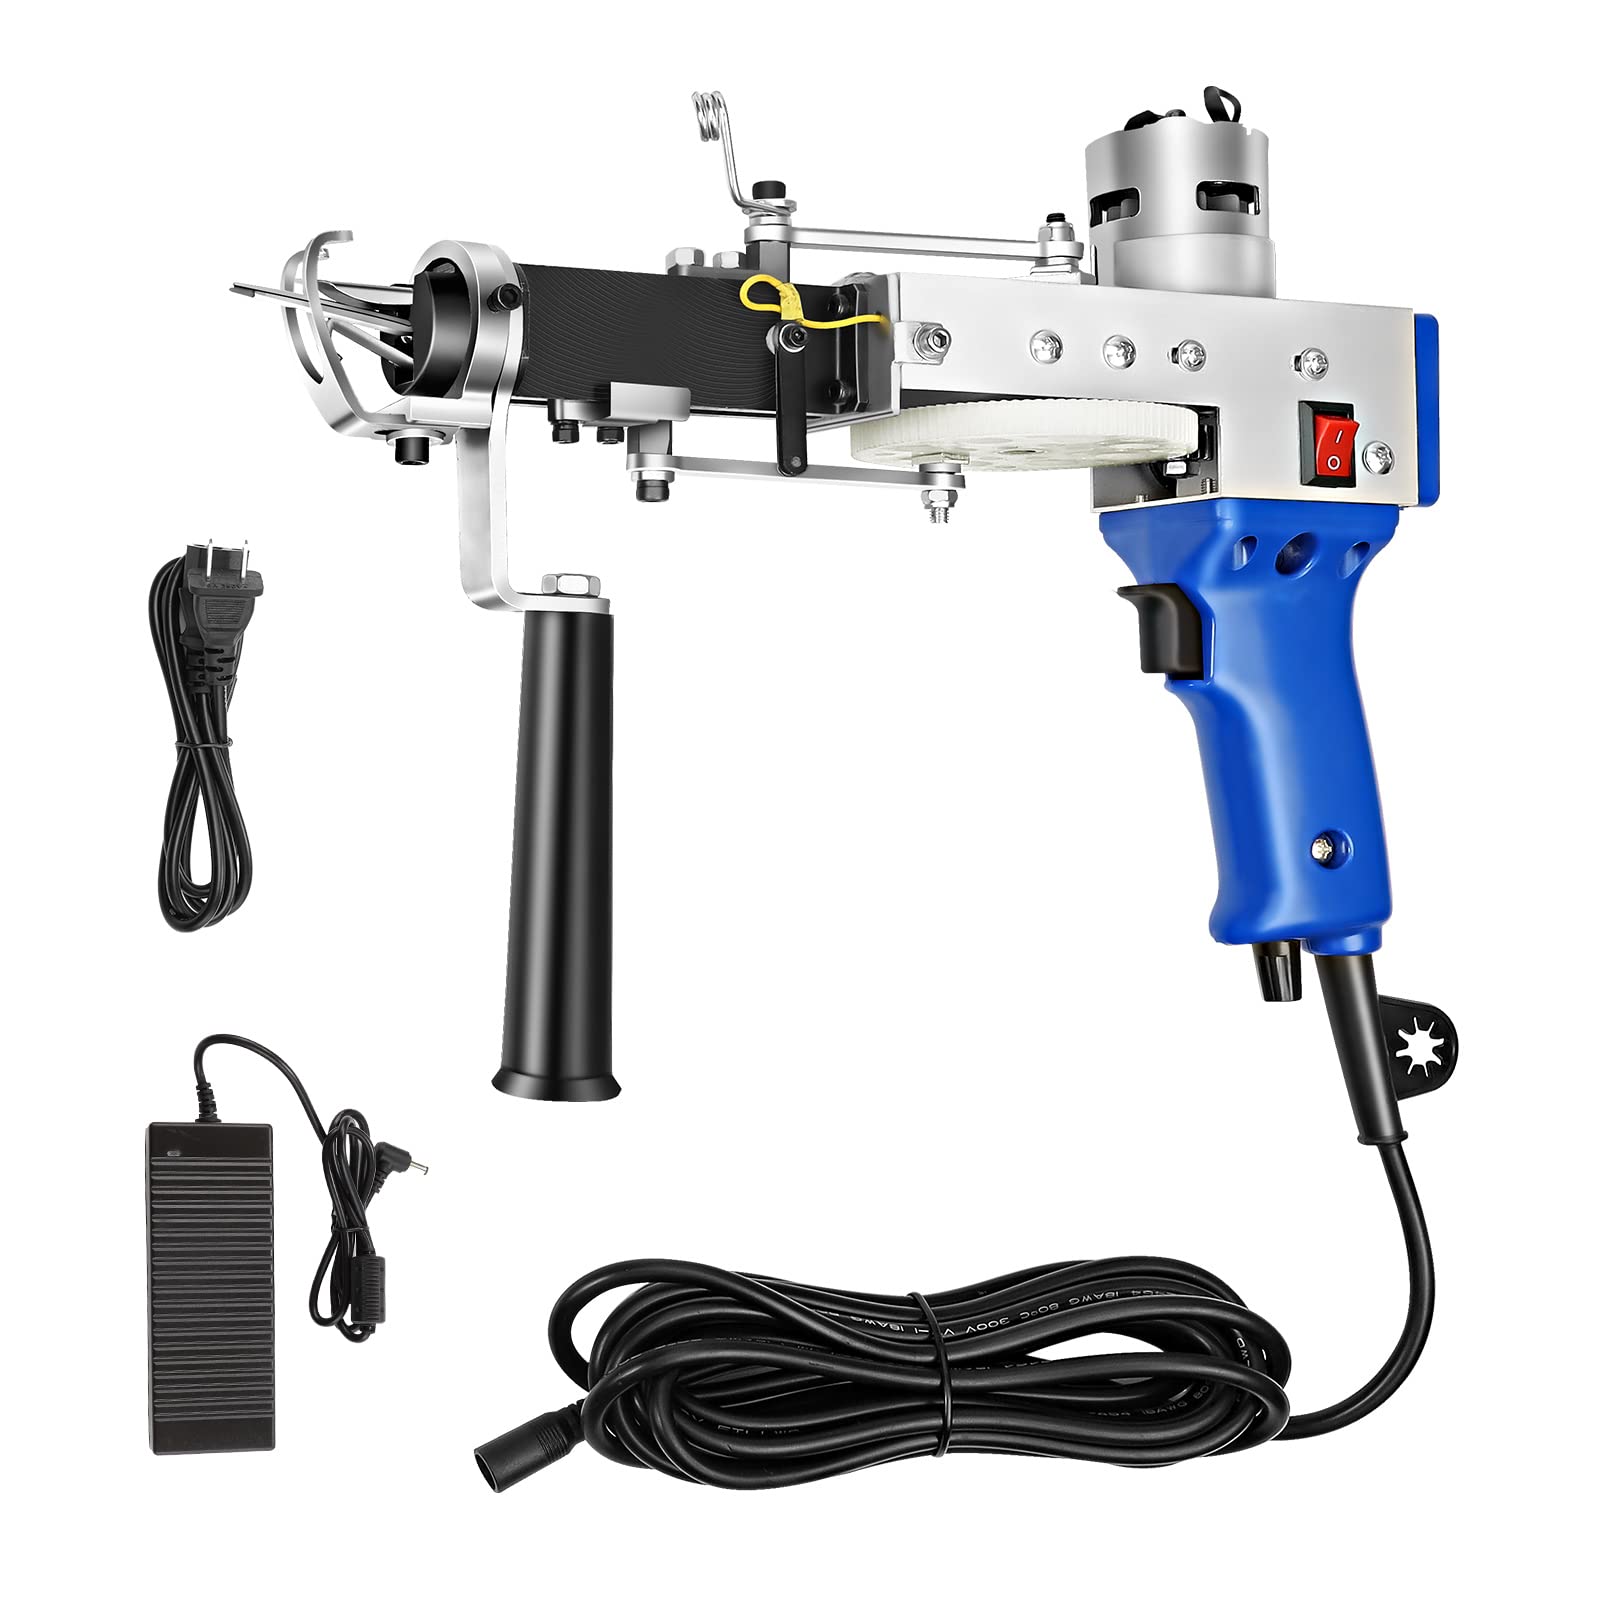 2 In 1 Tufting Gun Can Do Cut Pile And Loop Pile Electric Carpet Rug Guns,  Carpet Weaving Knitting Machine With 5-40 Stitches - AliExpress